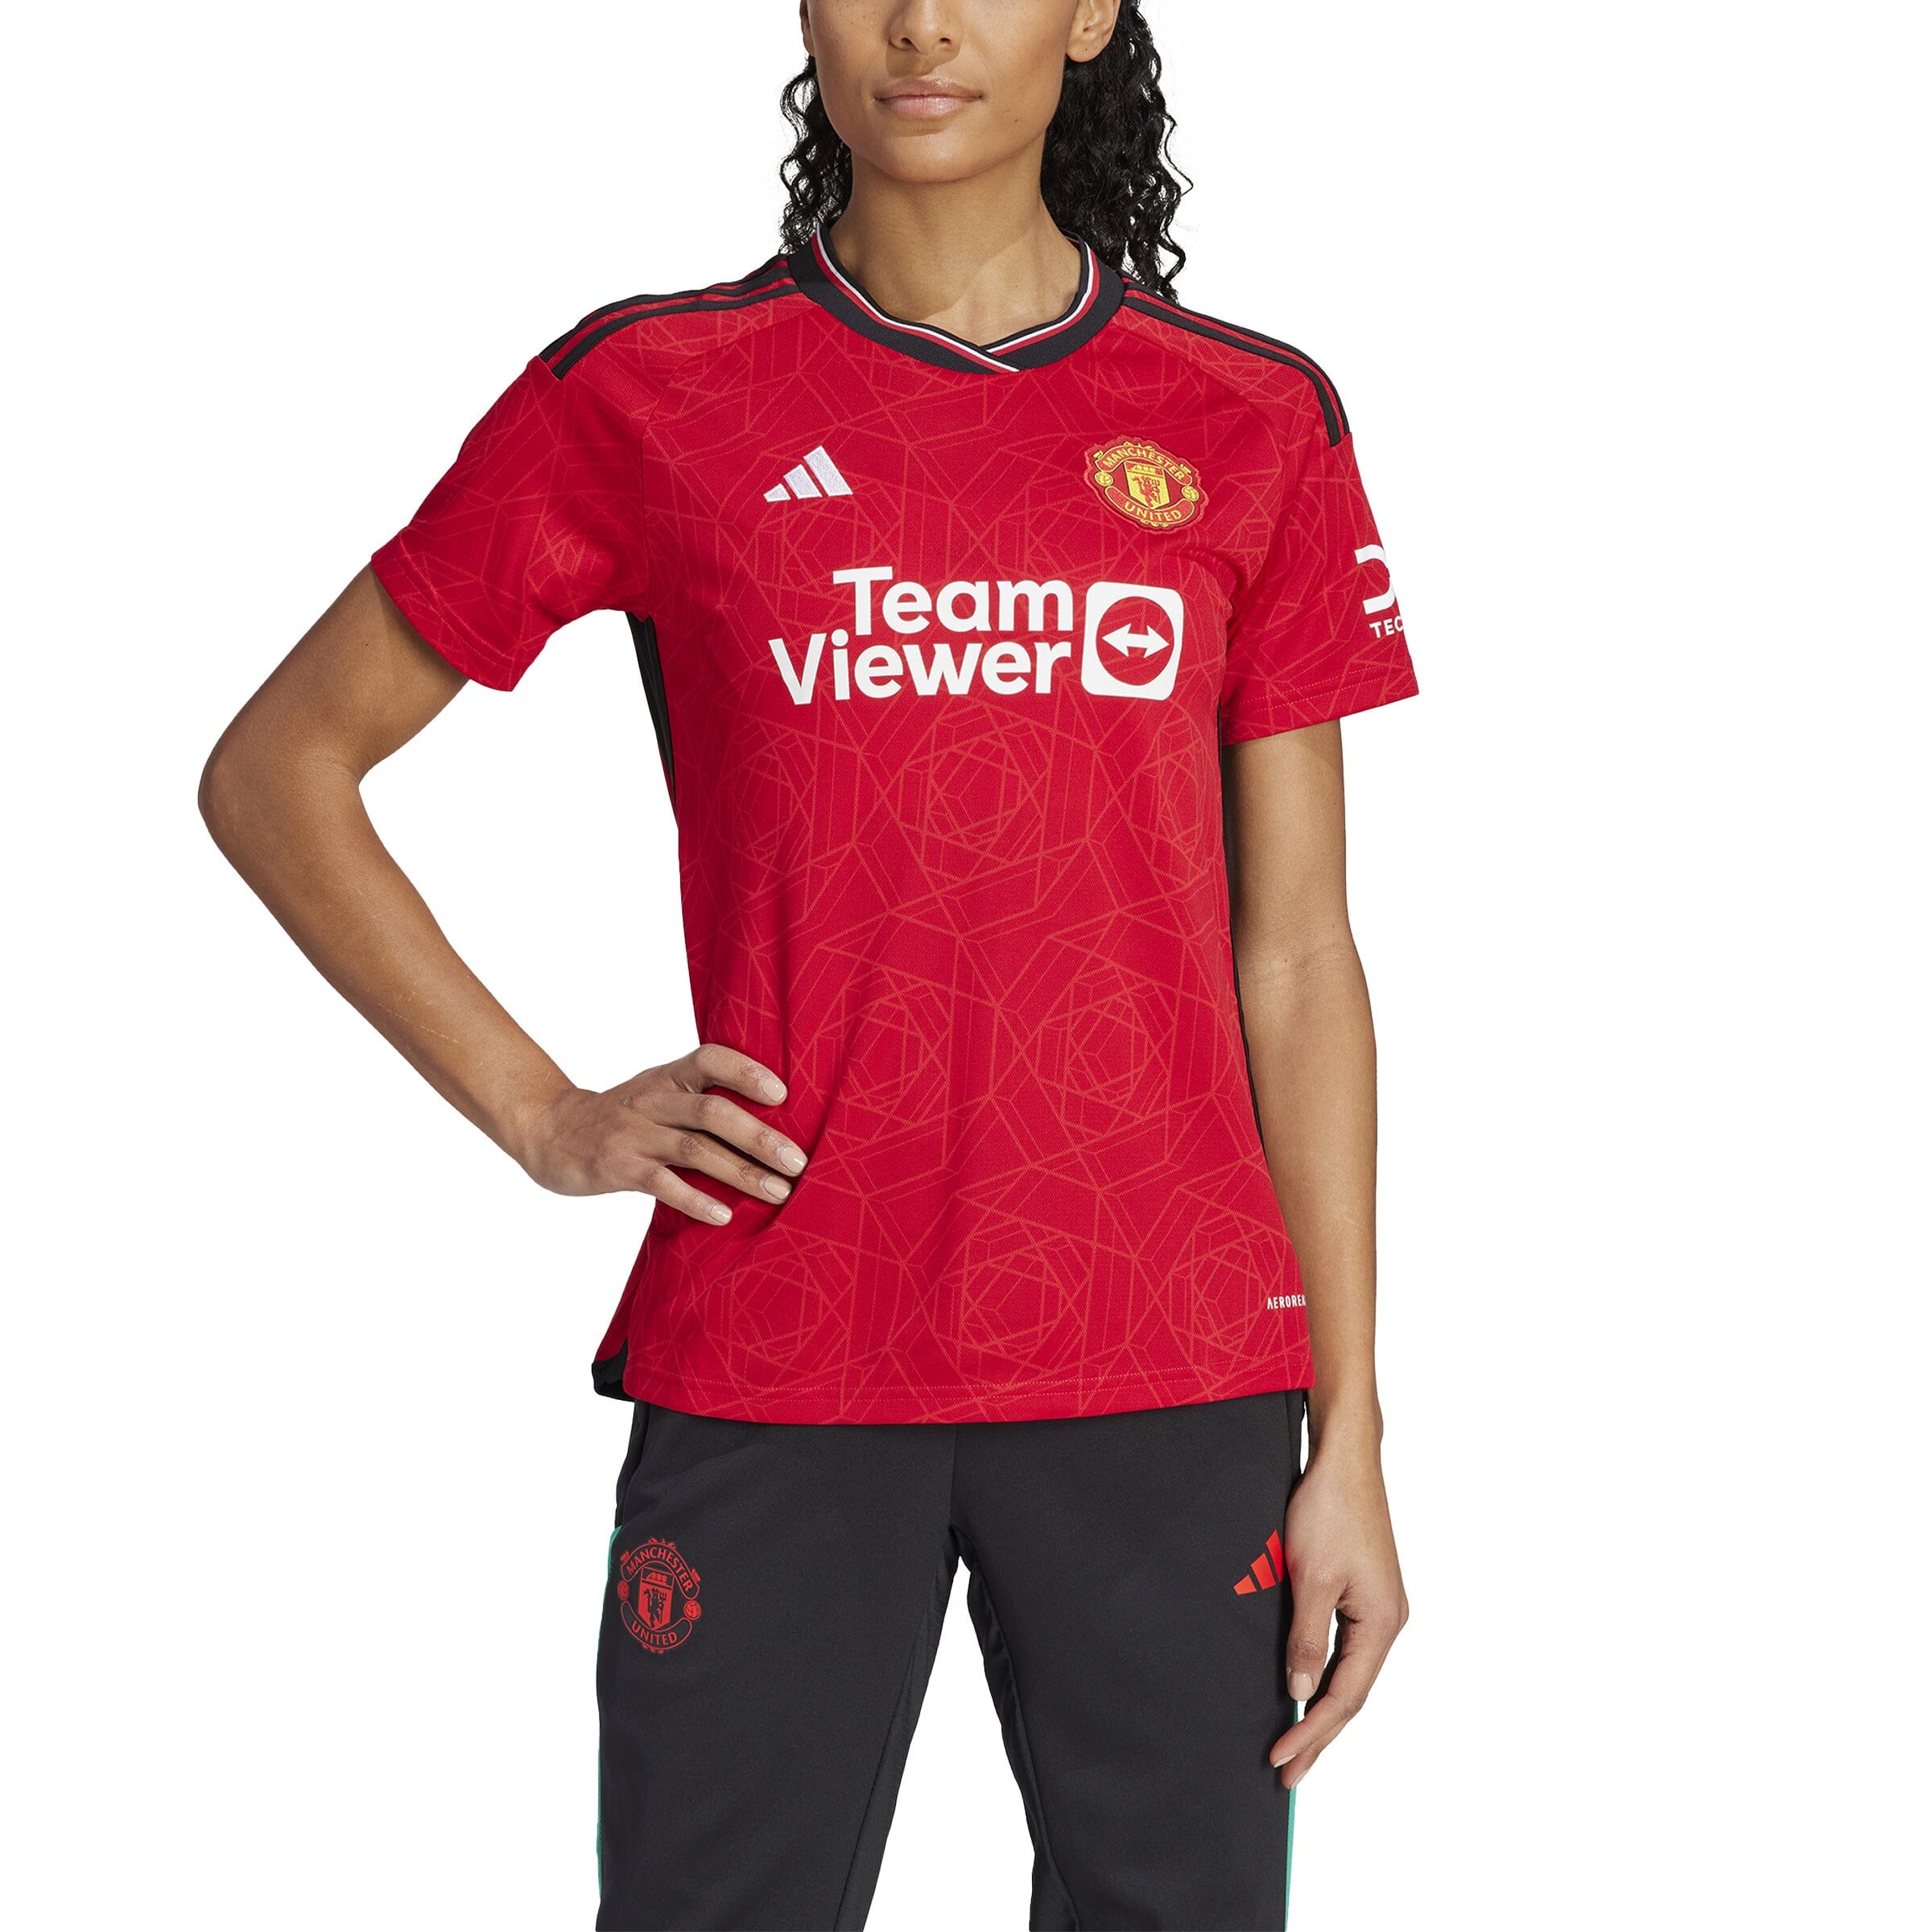 adidas Manchester United 23/24 Home Jersey - Red, Women's Soccer